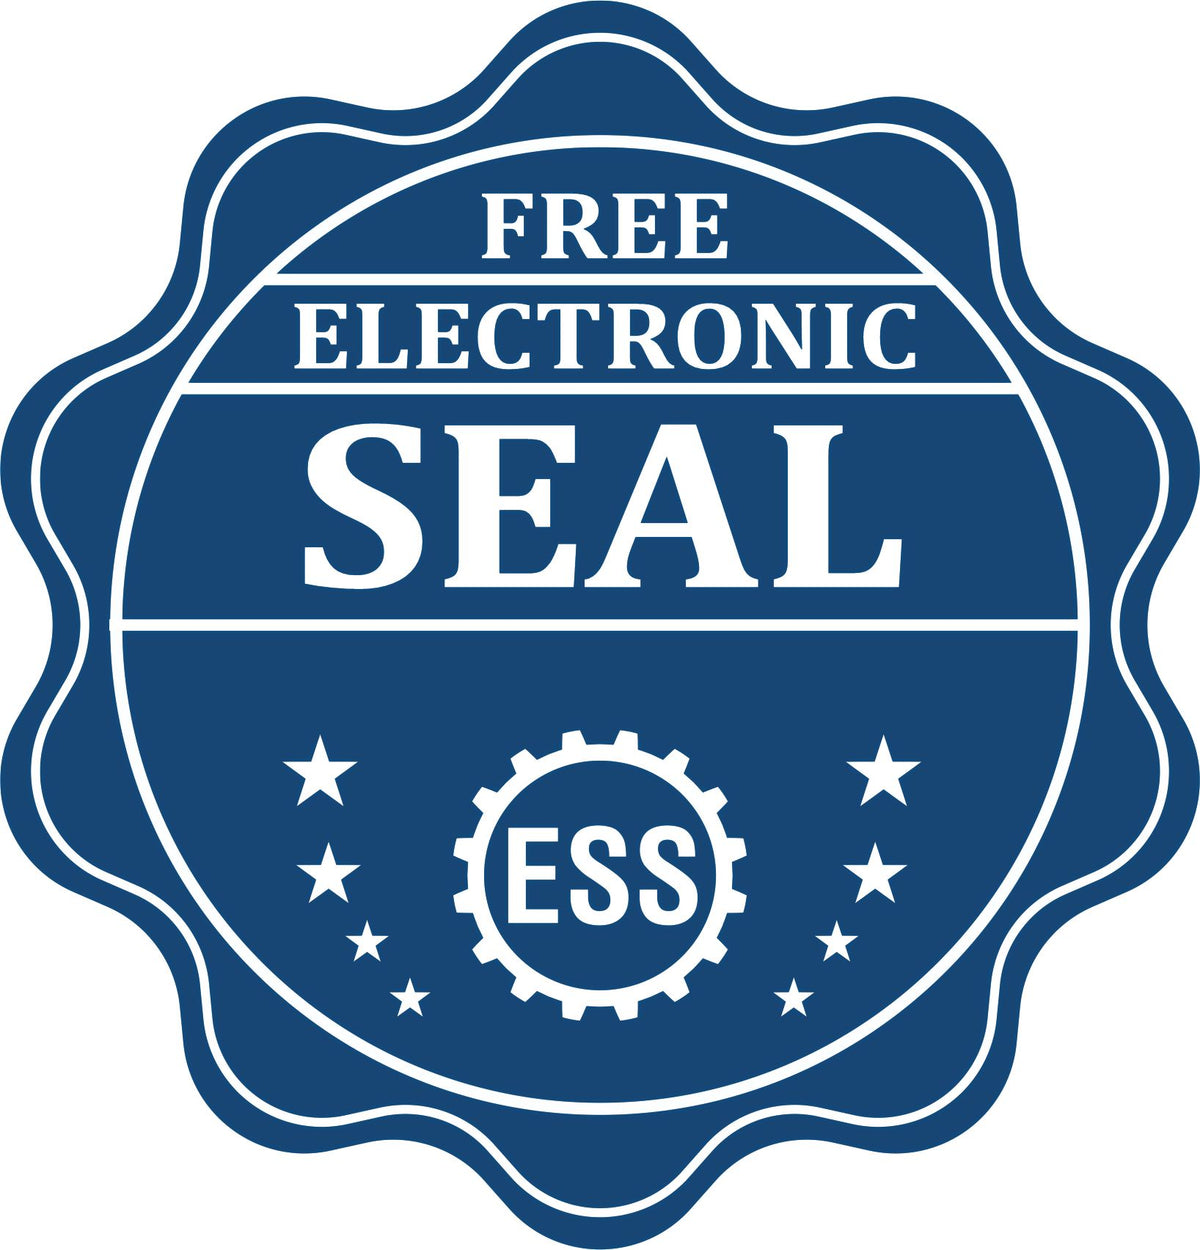 A badge showing a free electronic seal for the New Mexico Desk Architect Embossing Seal with stars and the ESS gear on the emblem.